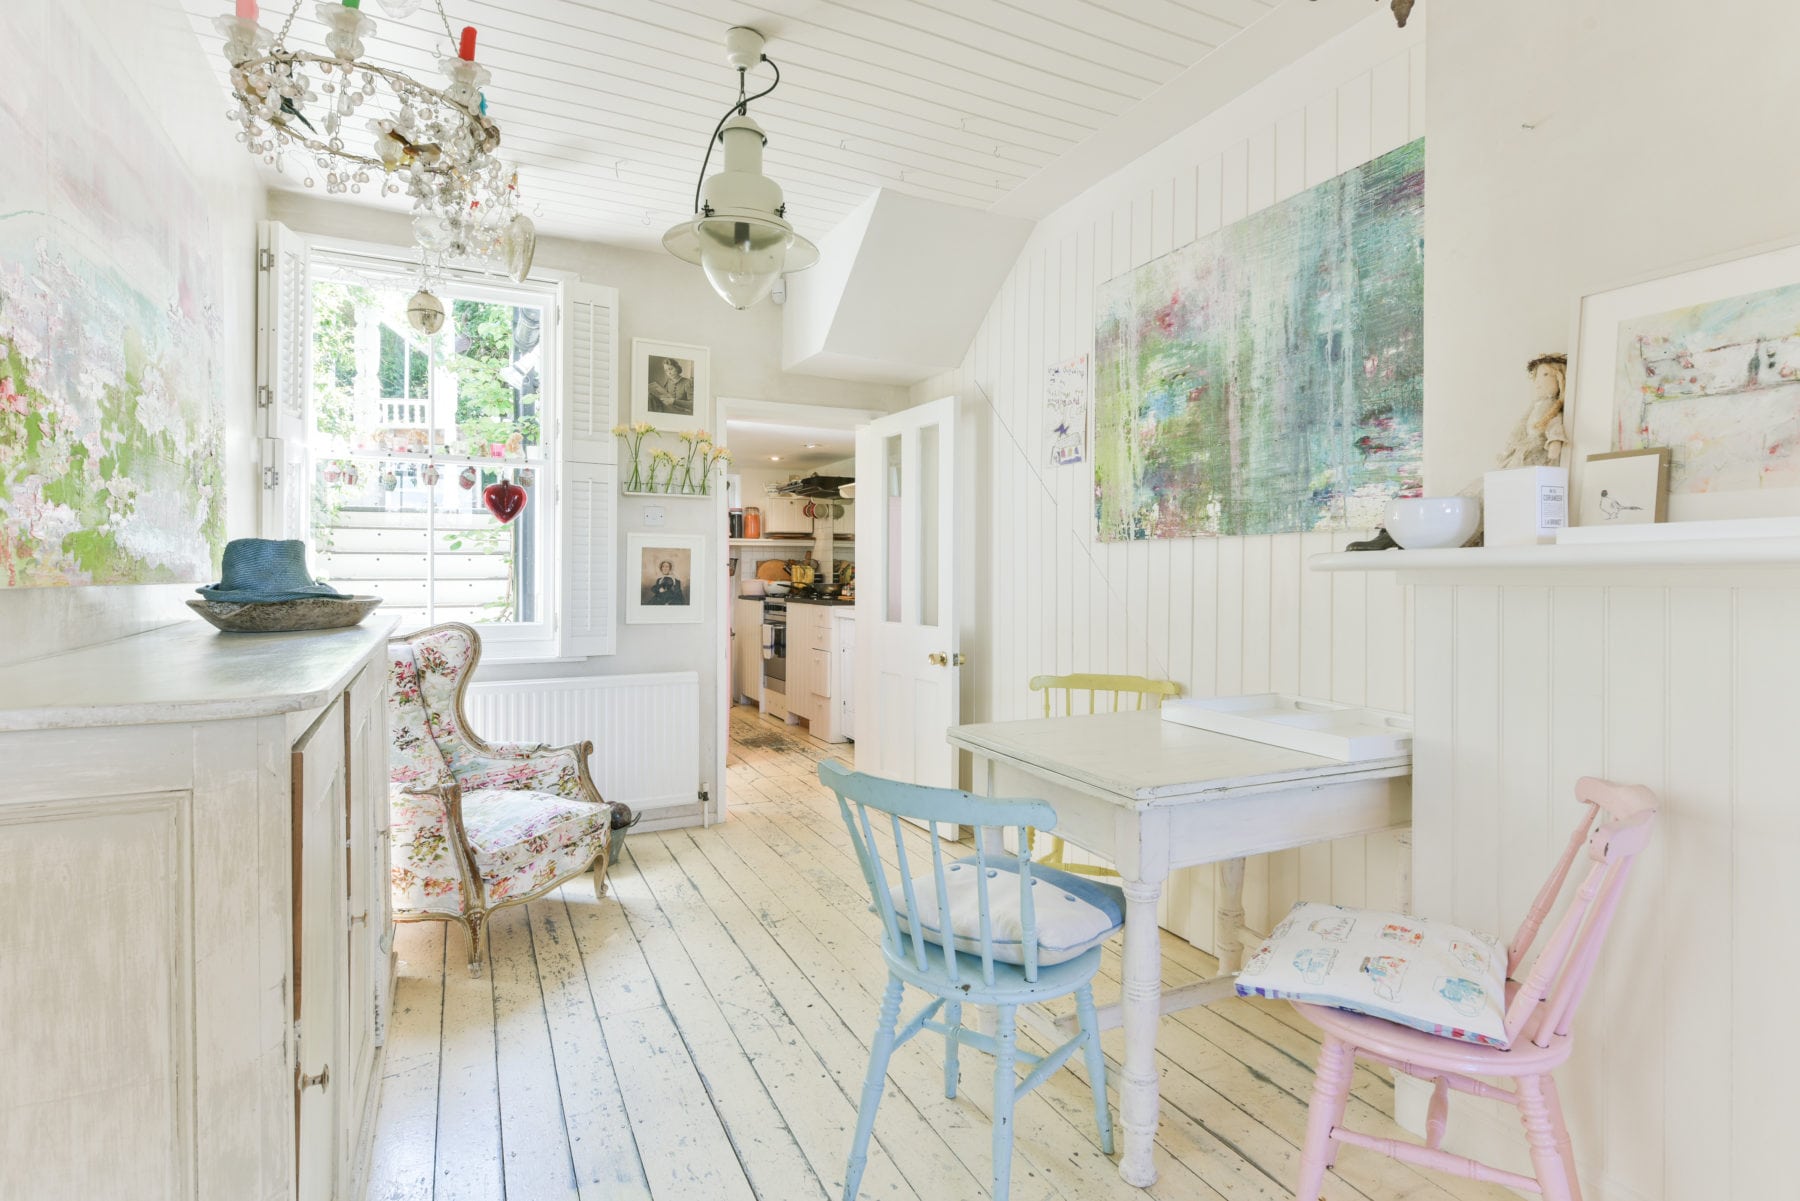 British Artist Jessica Zoob rents out her Lewes Home via Airbnb